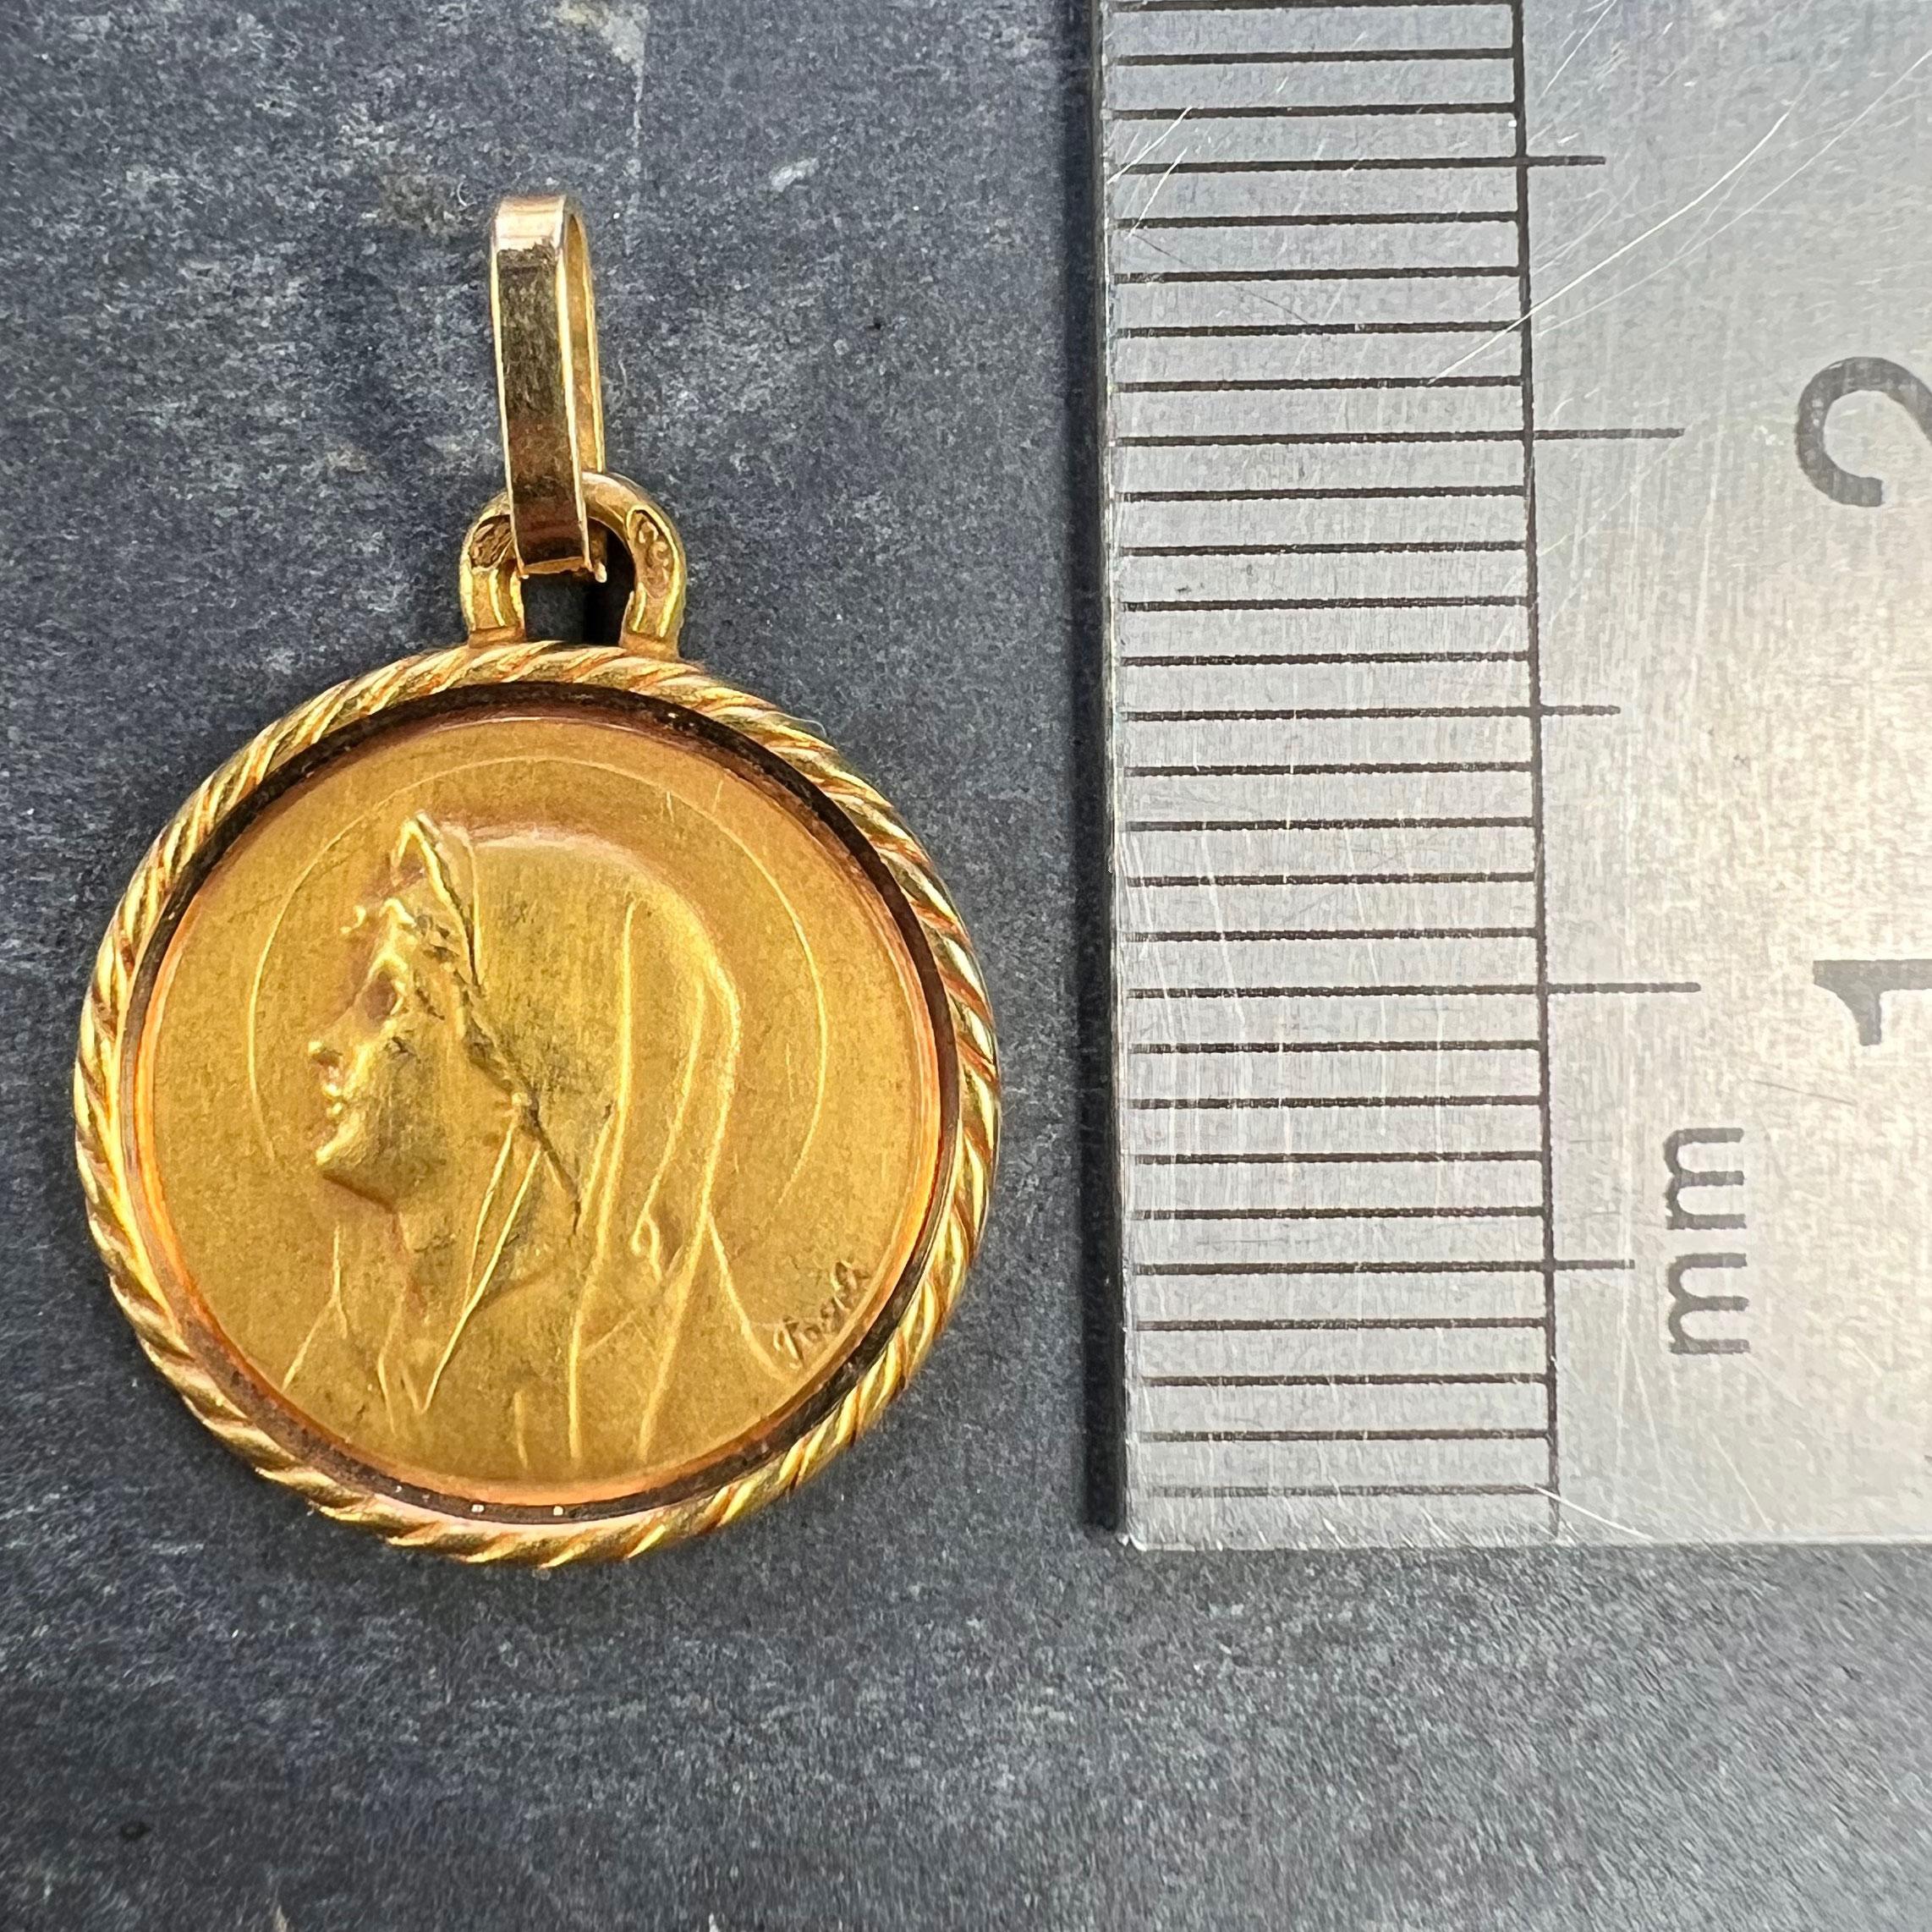 French Perroud Pagdi 18K Yellow Gold Virgin Mary Medal Pendant For Sale 5